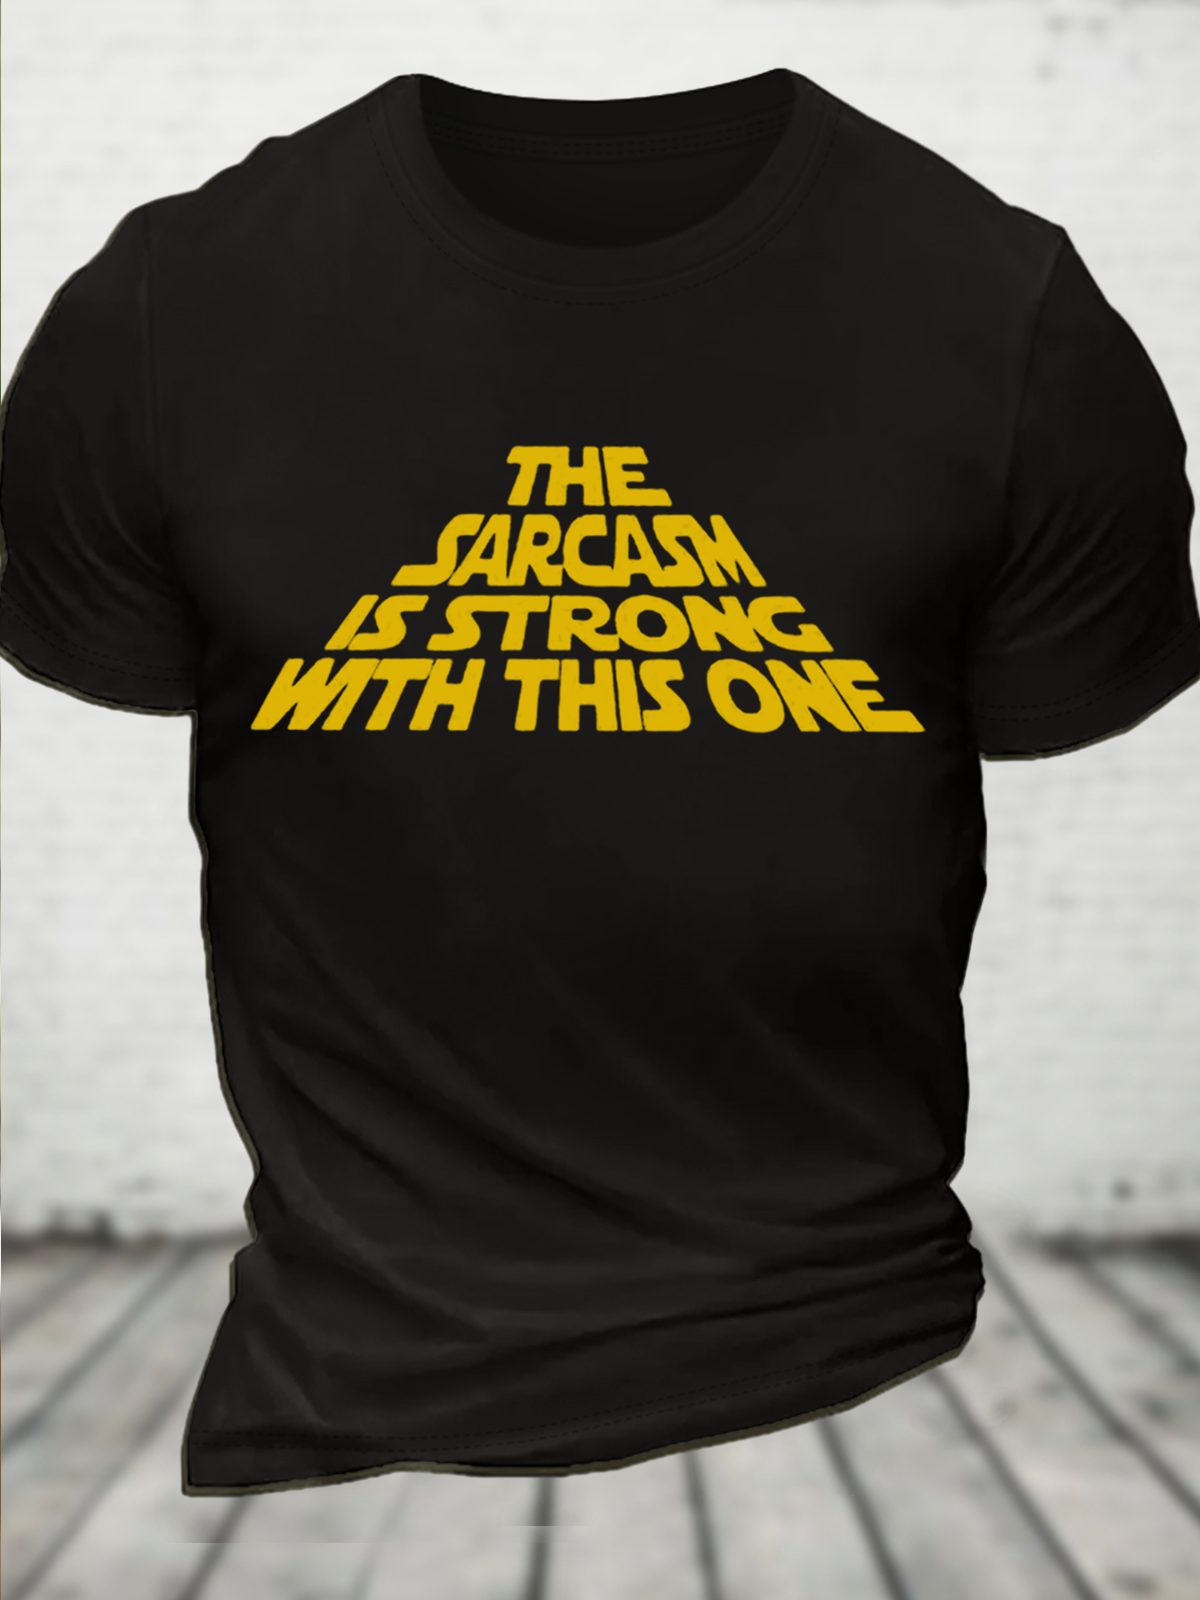 Men's The Sarcasm Is Strong With This One Casual Text Letters Loose Crew Neck Cotton T-Shirt